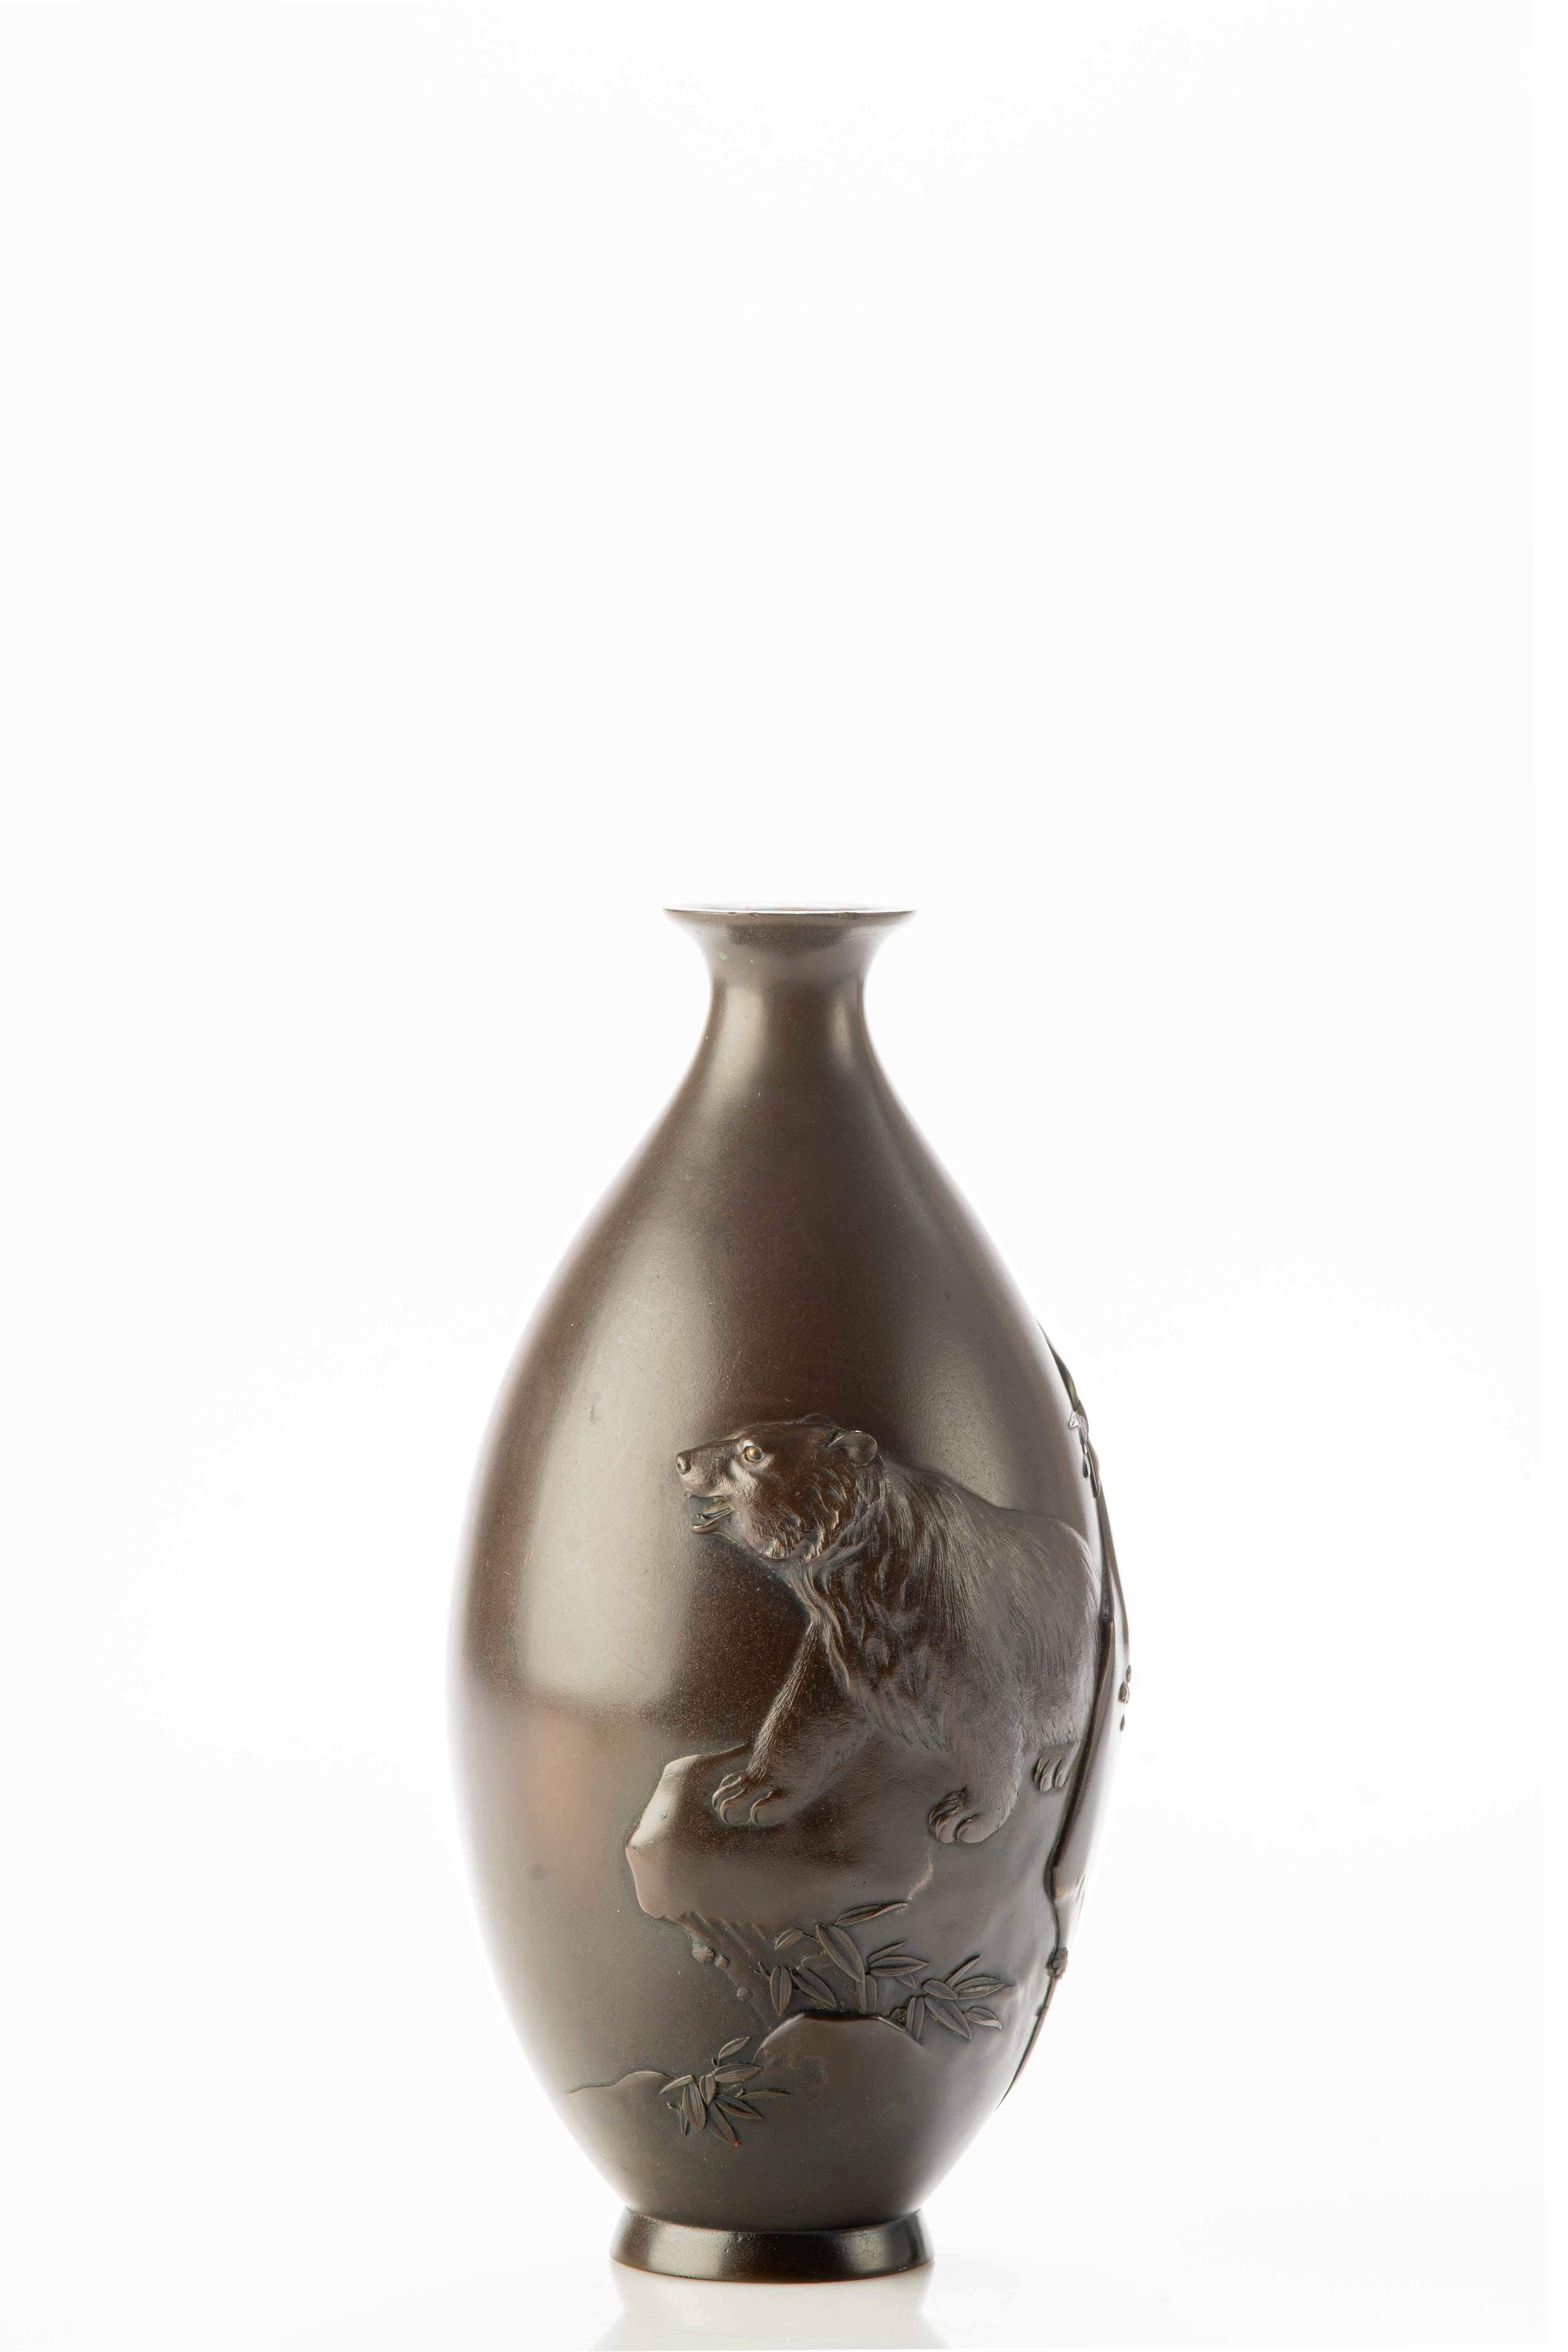 Japanese drop-shaped bronze vase worked with a remarkable depth that transforms the work into a breathtaking three-dimensional scene with a majestic bear in relief in the center as it stands powerfully on a rock.

The bear is portrayed with a